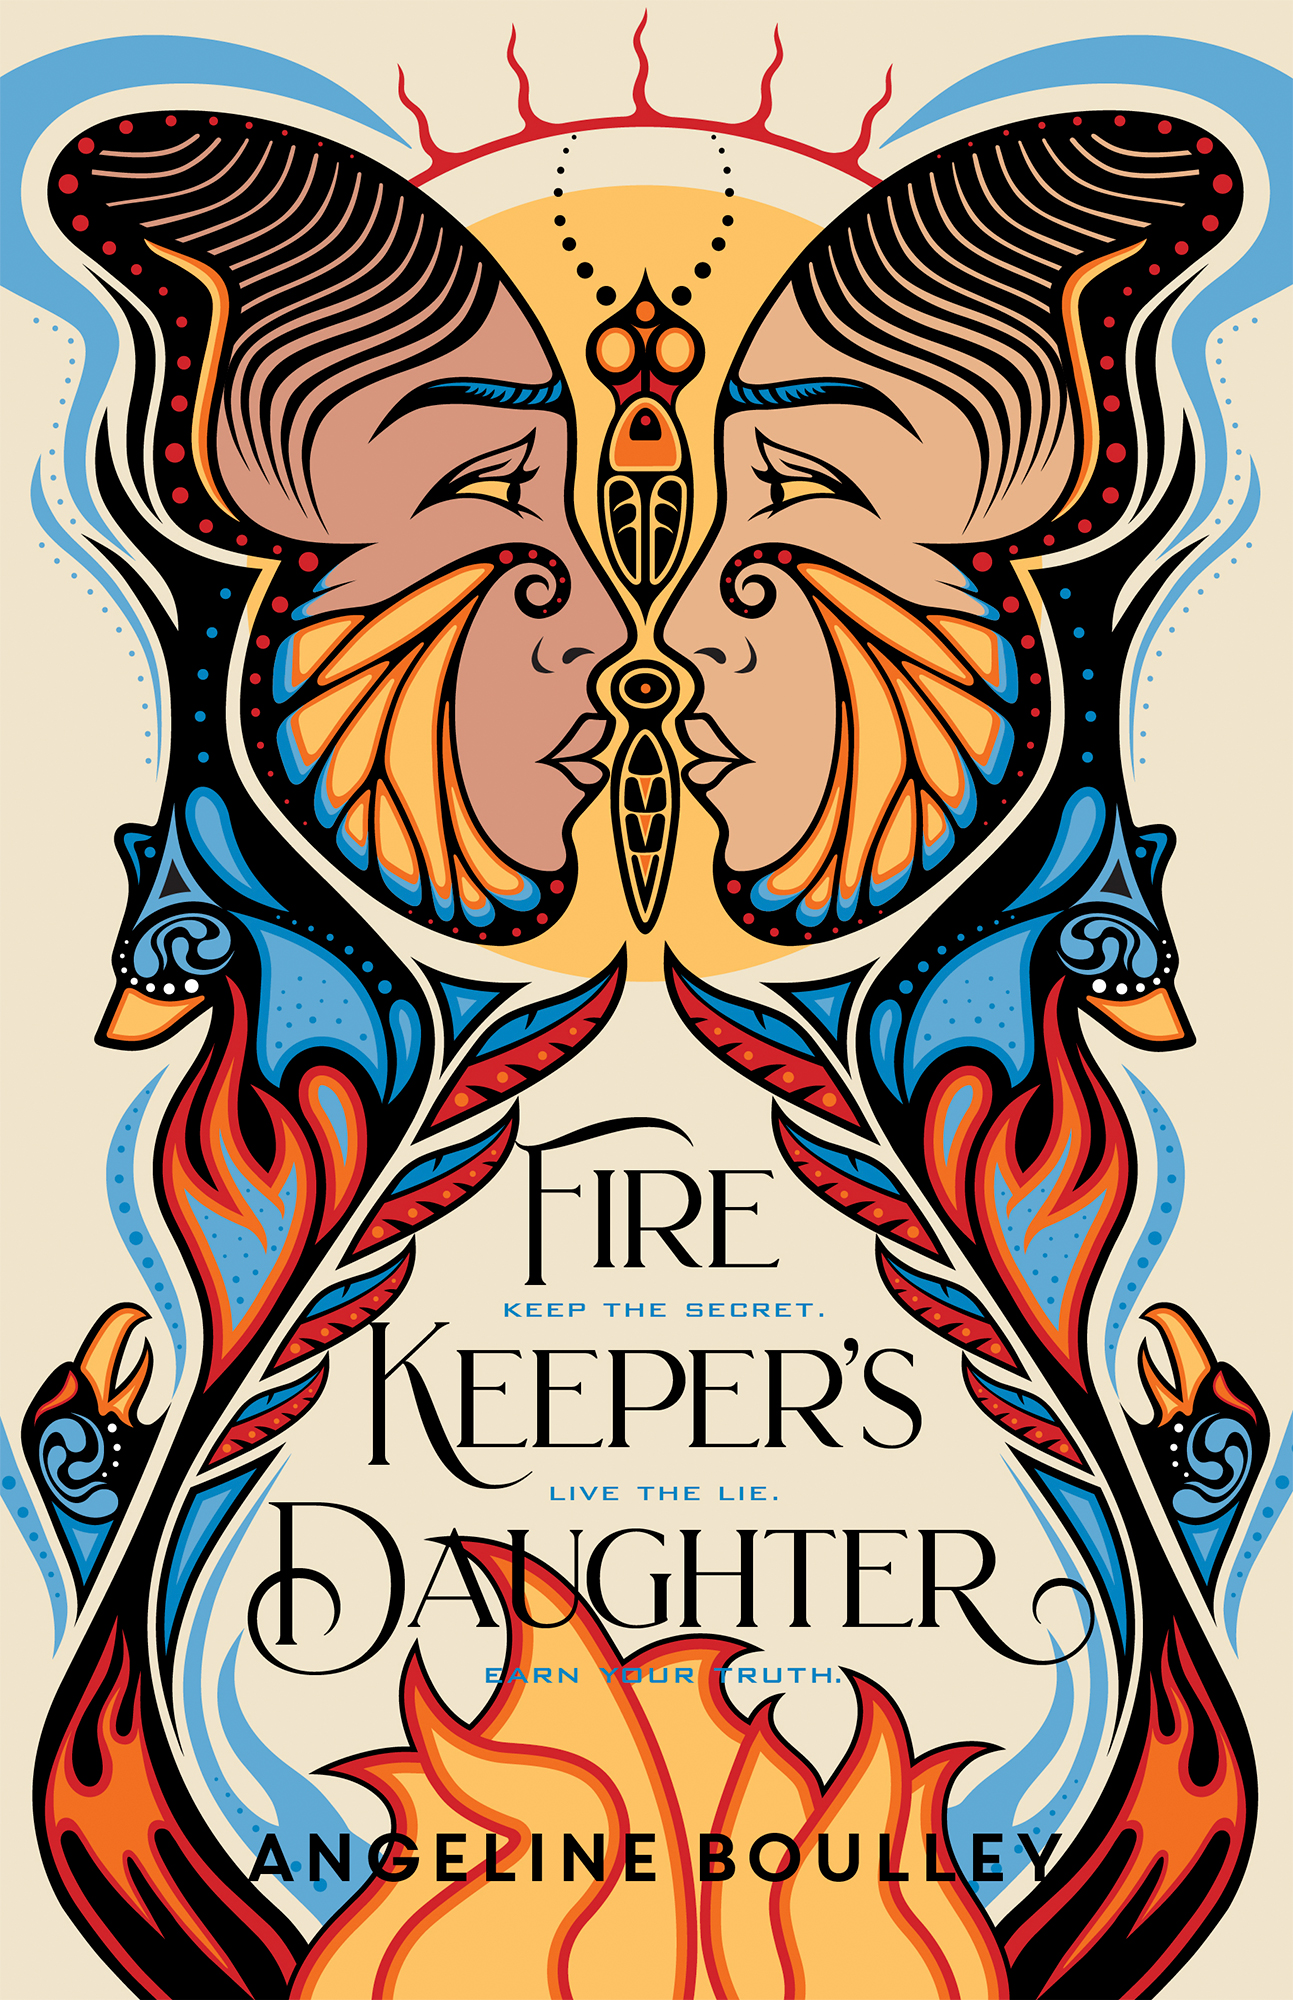 Fire Keepers Daughter